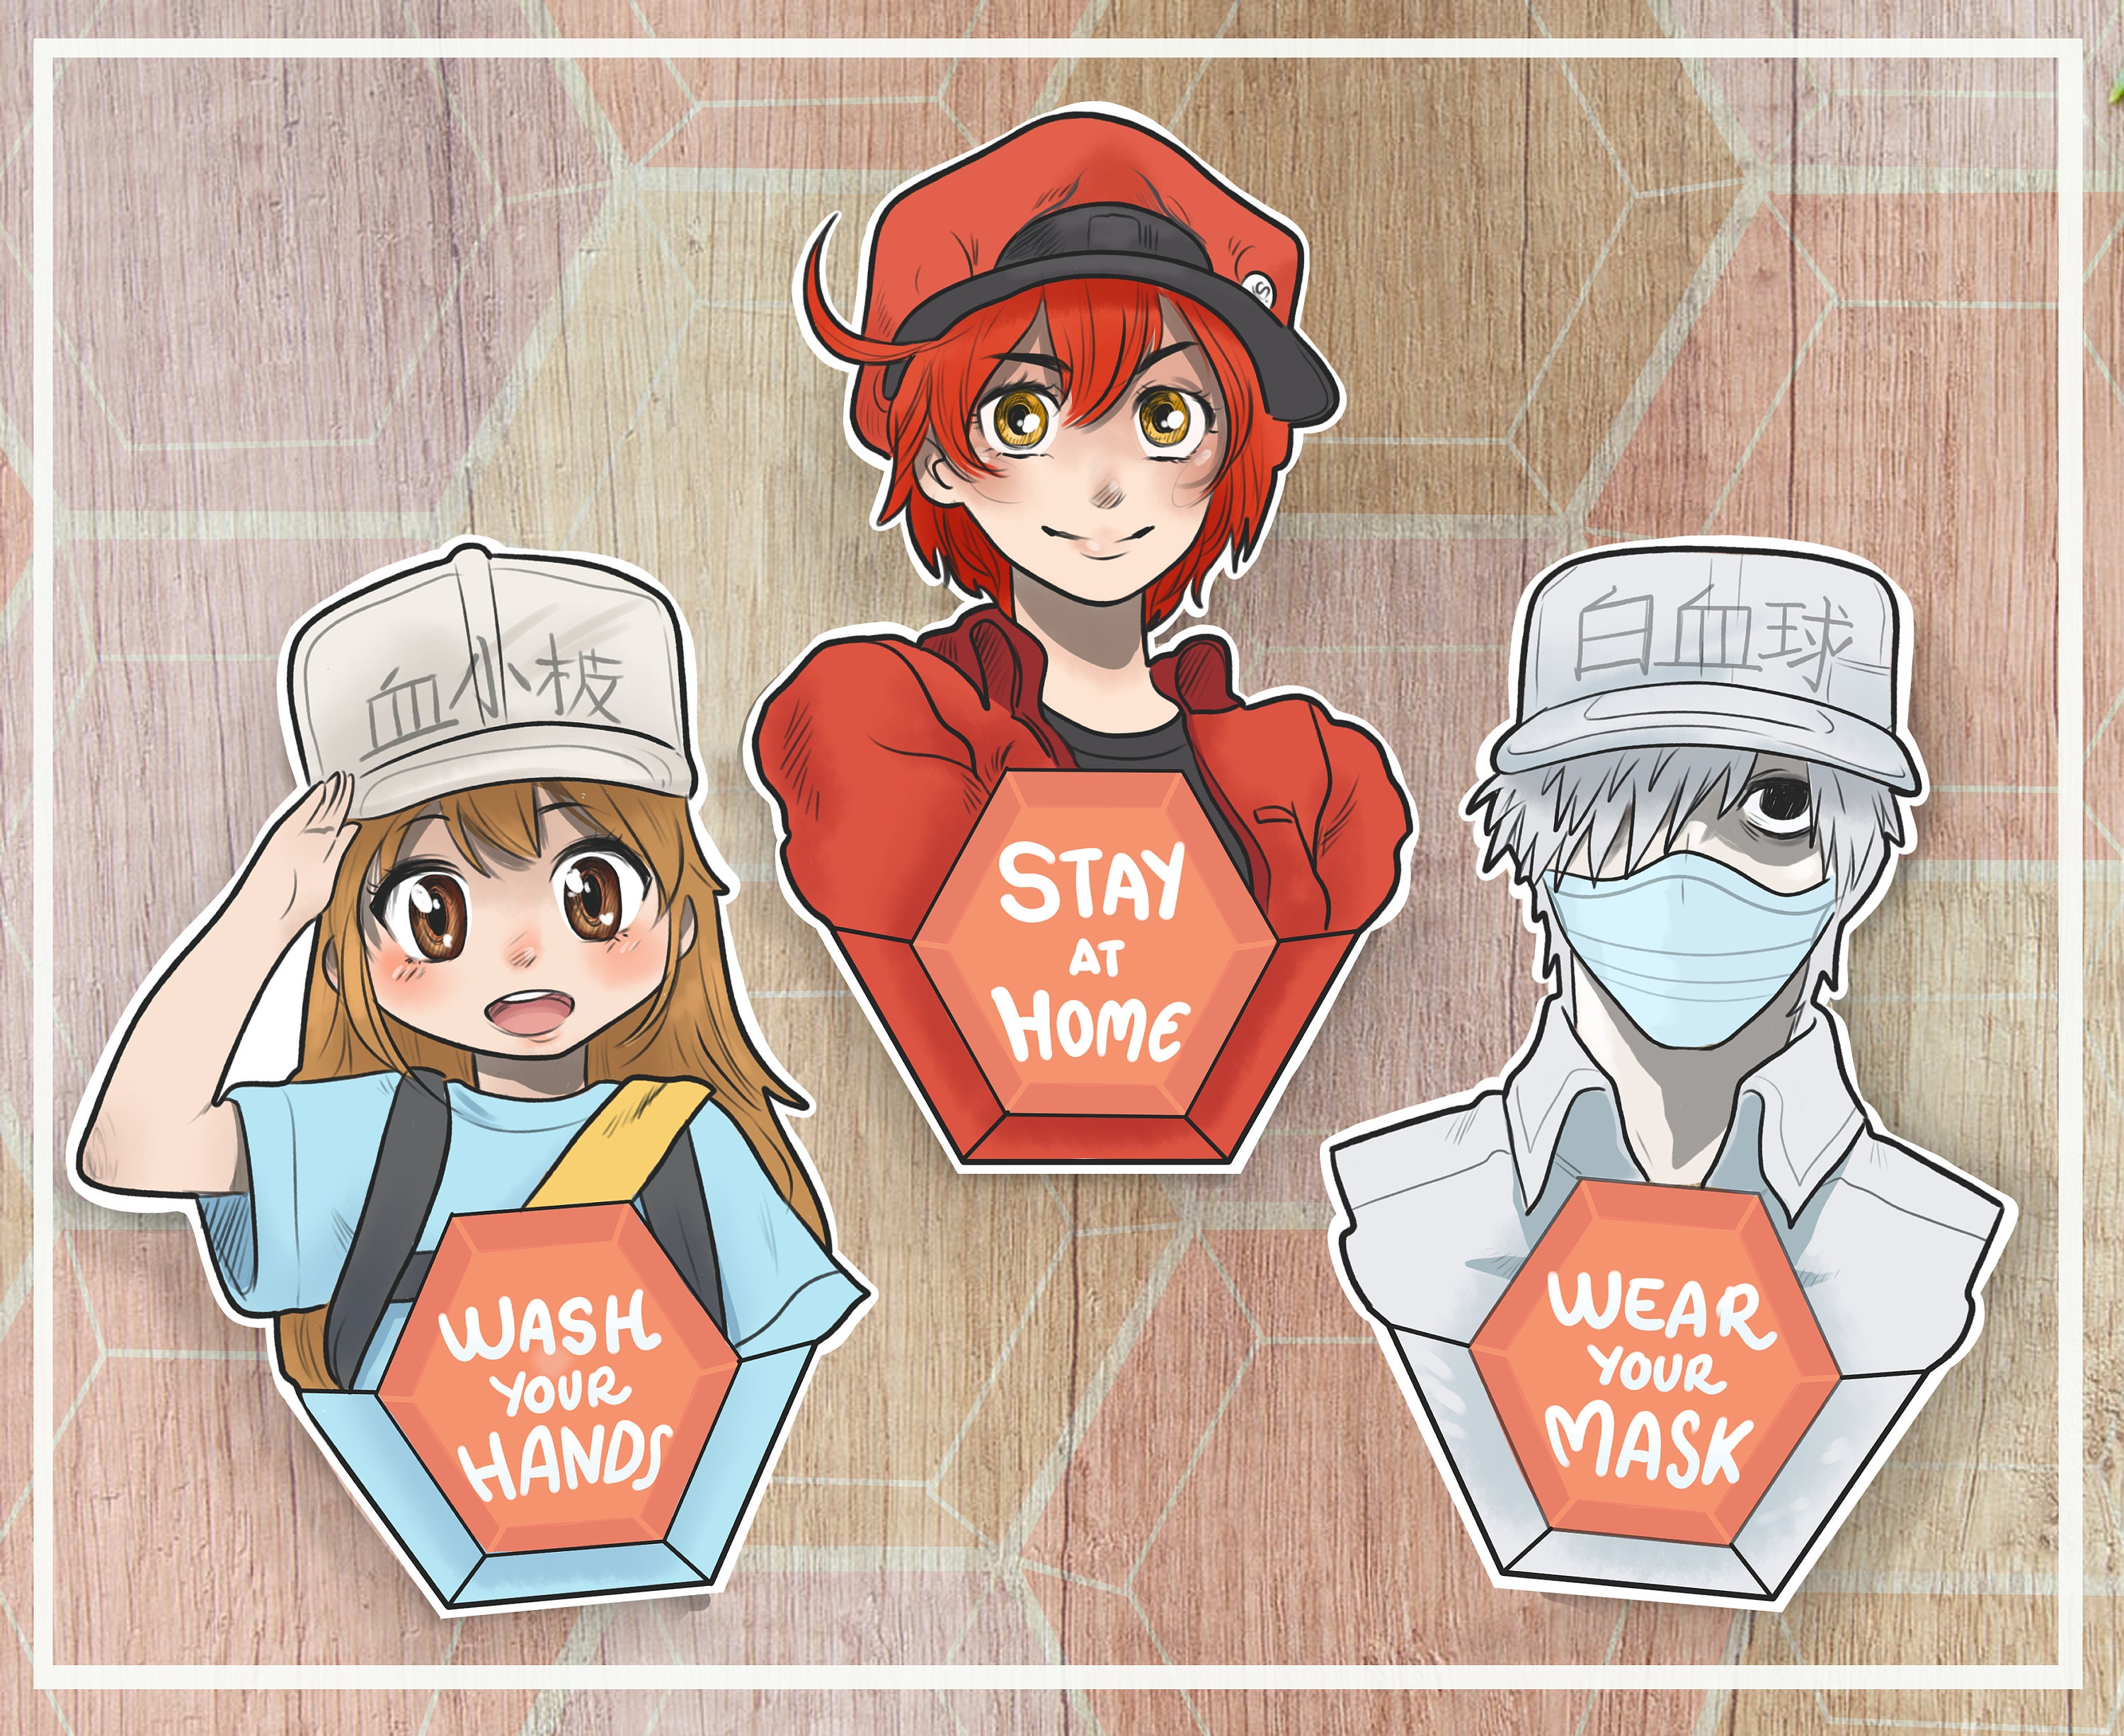 Cells at work, white blood cell x red blood cell